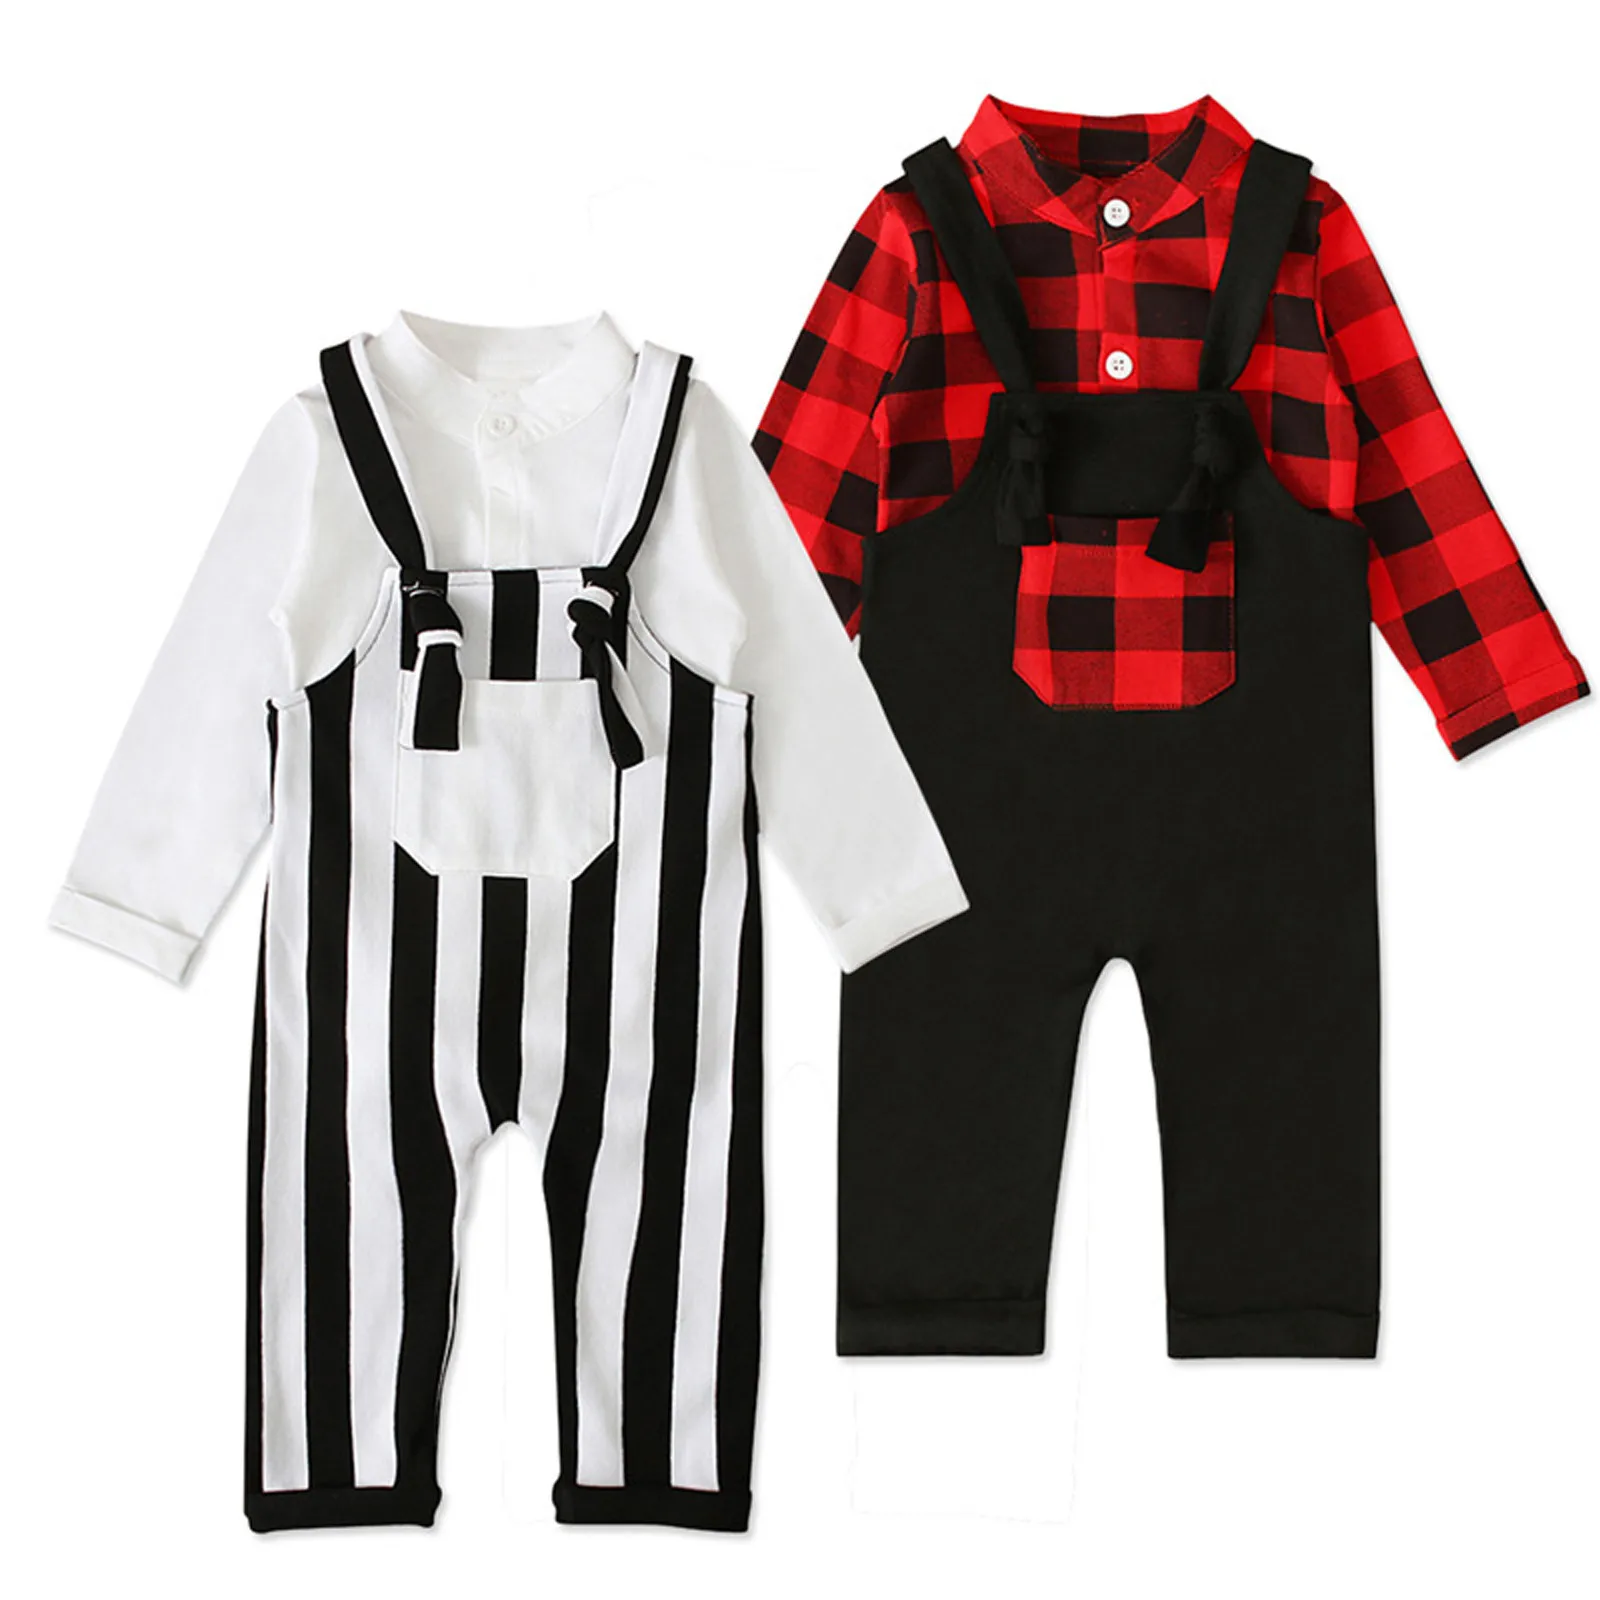 0M-24M Newborn Kids Baby Boys Romper Bodysuit Tops+Solid Suspender Pants Outfits Set Fashion British style Baby Boys Clothes